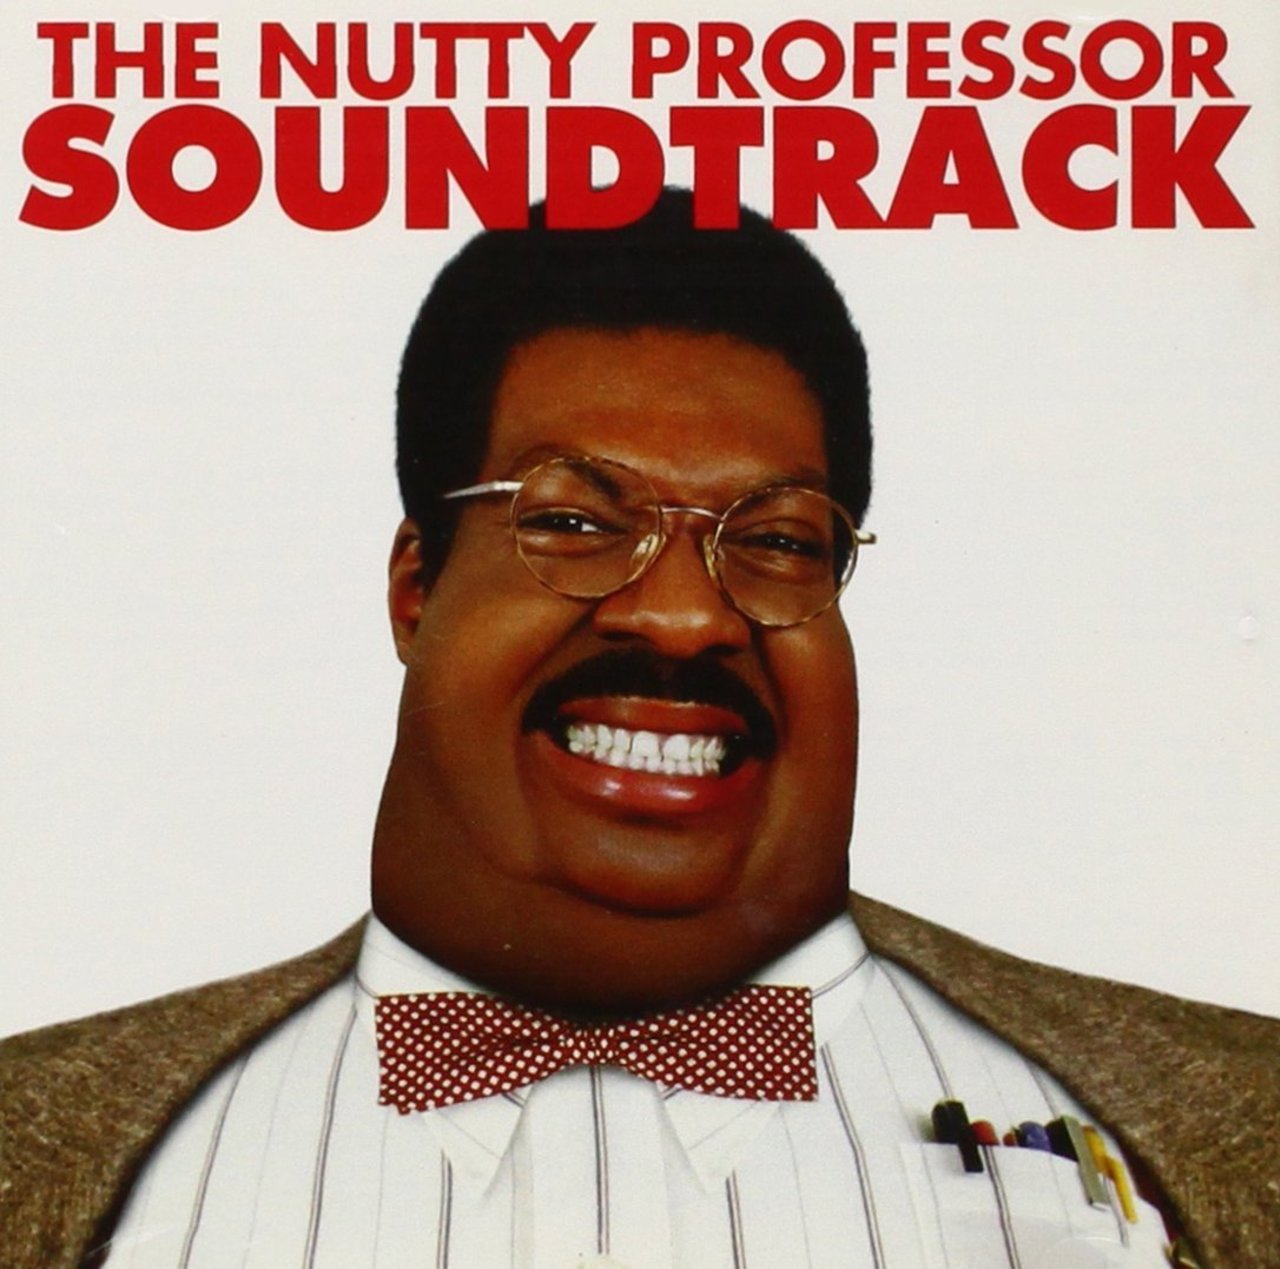 THE NUTTY PROFESSOR (1996): "Touch Me, Tease Me," Case feat. Foxy Brown